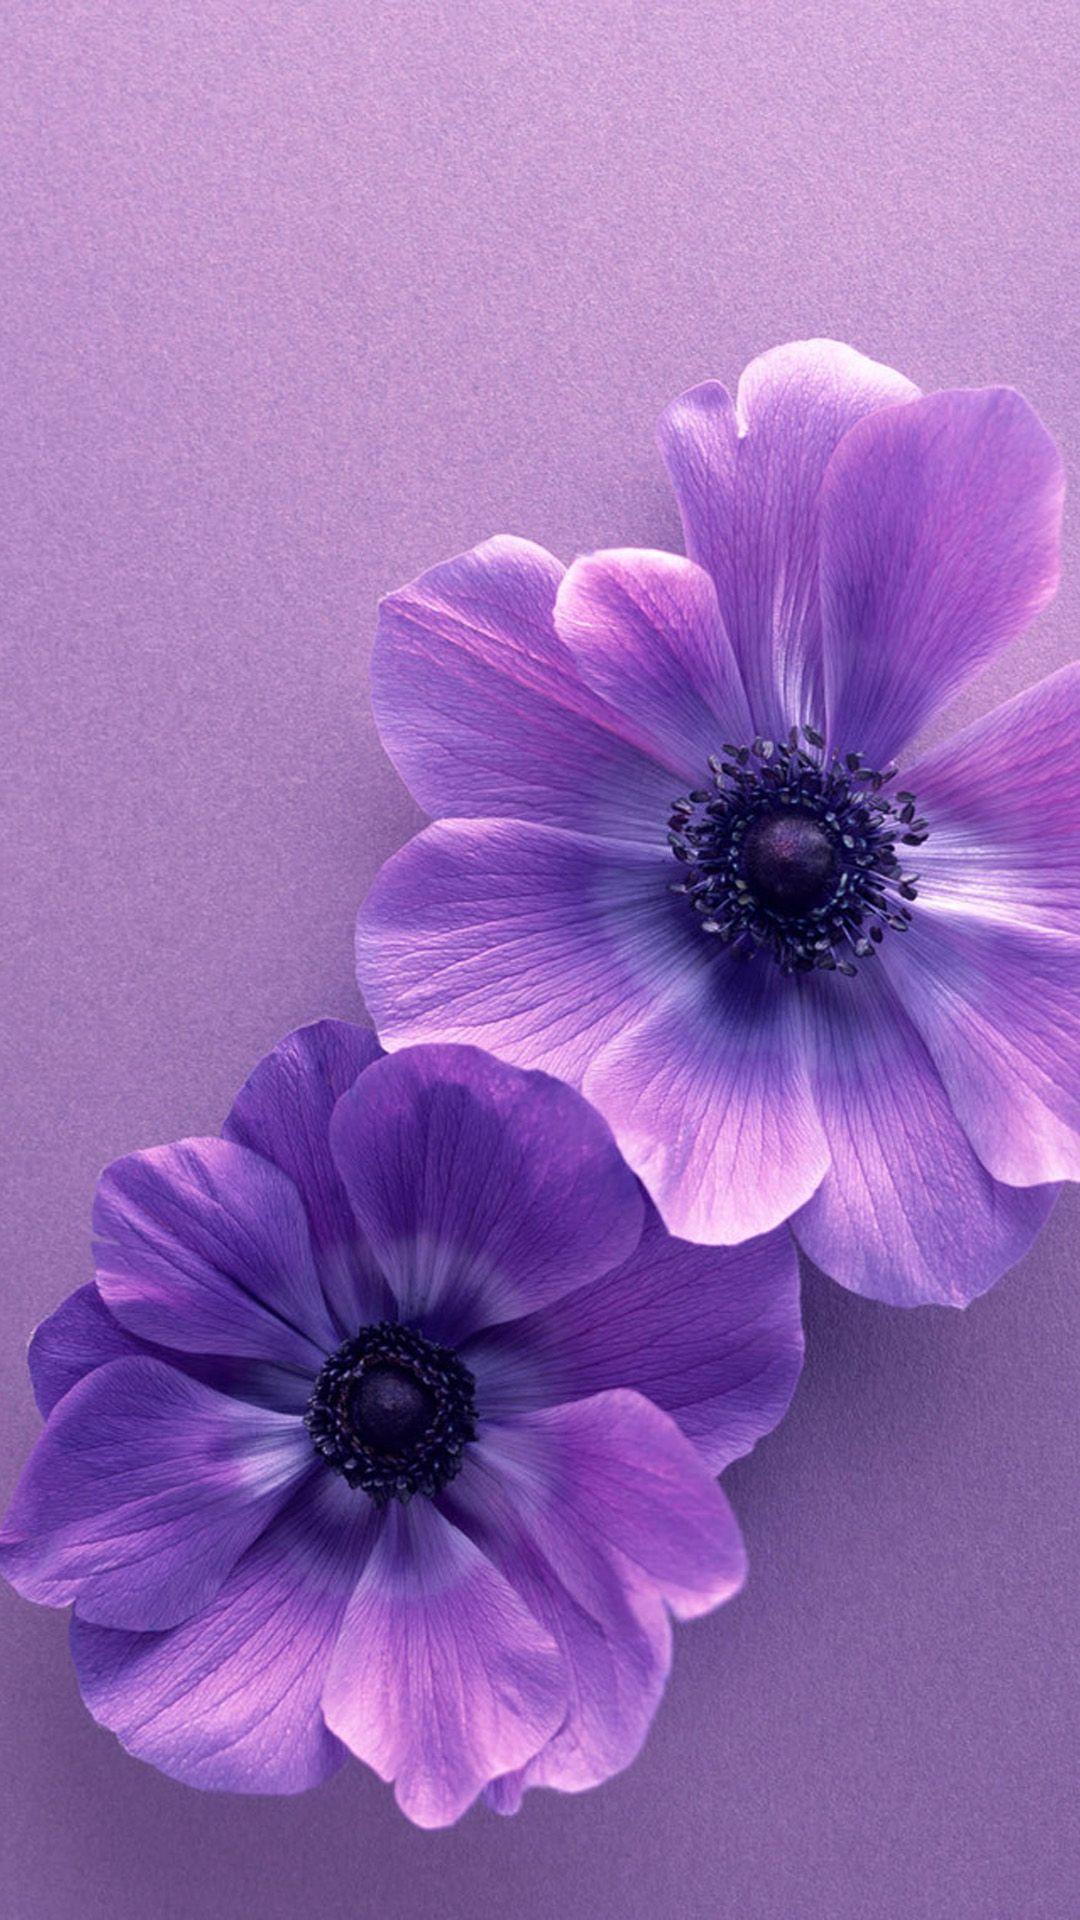 25 Greatest flower wallpaper aesthetic purple You Can Get It Without A ...